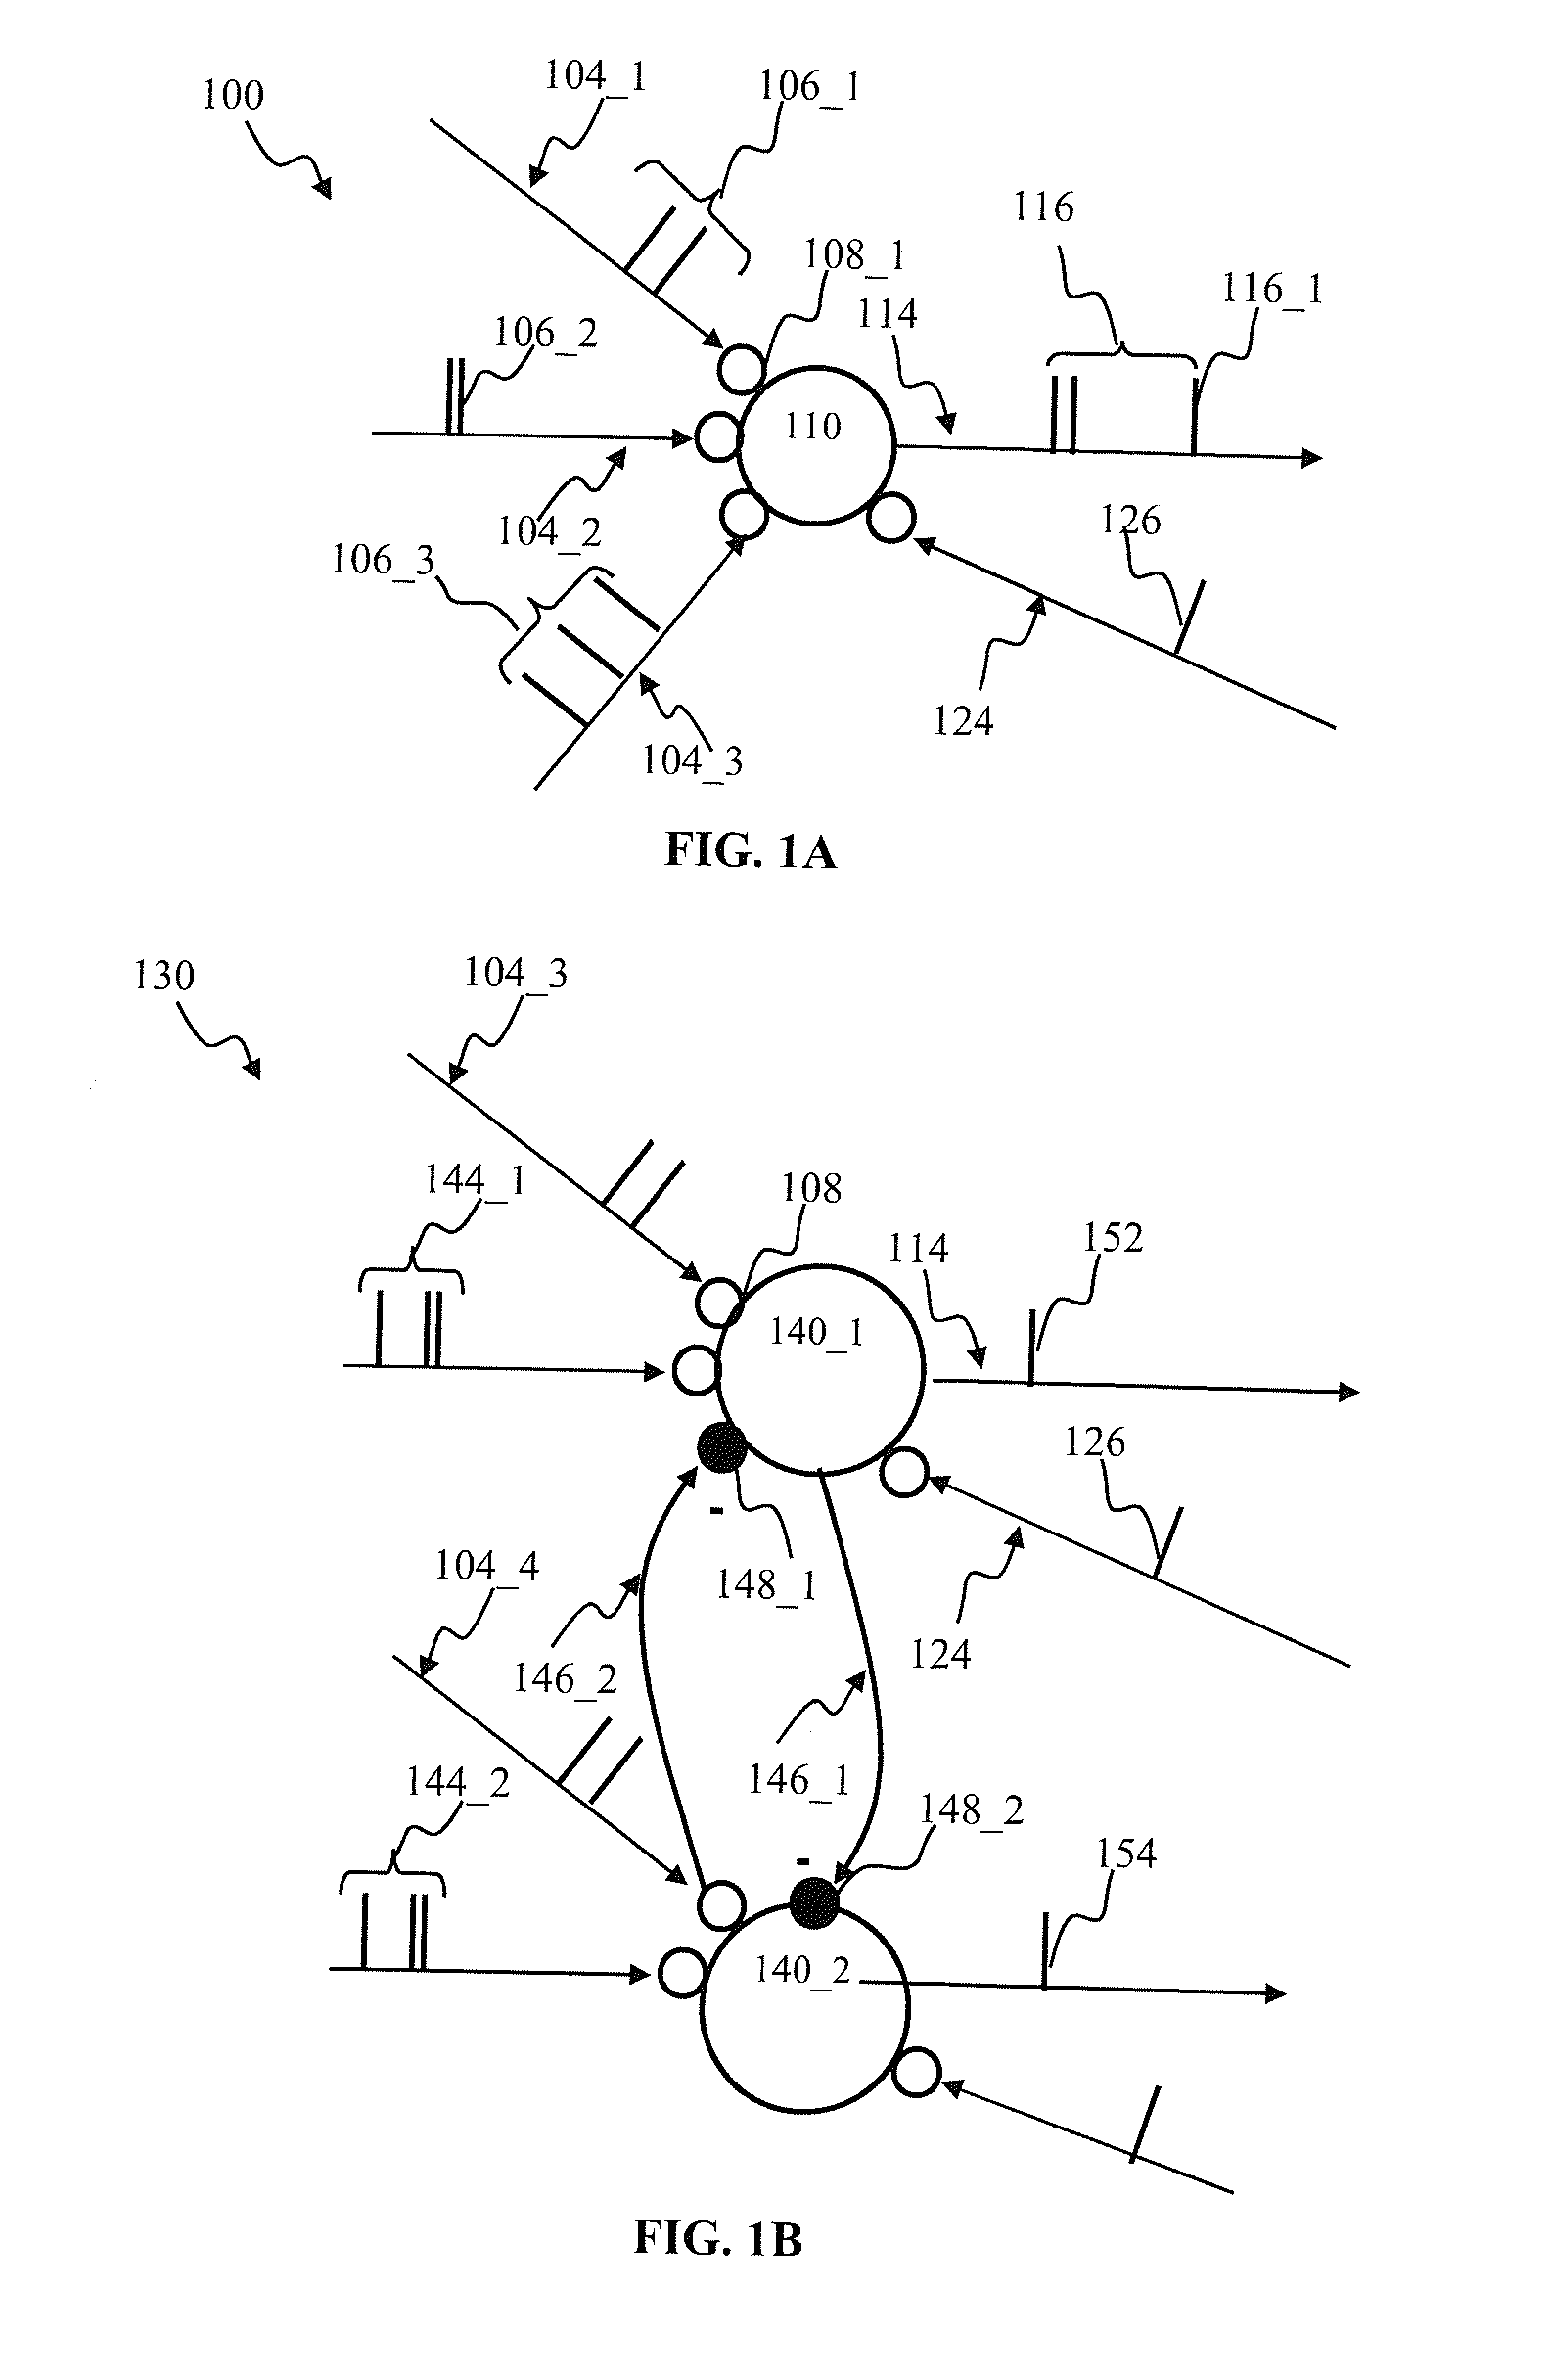 Modulated plasticity apparatus and methods for spiking neuron network